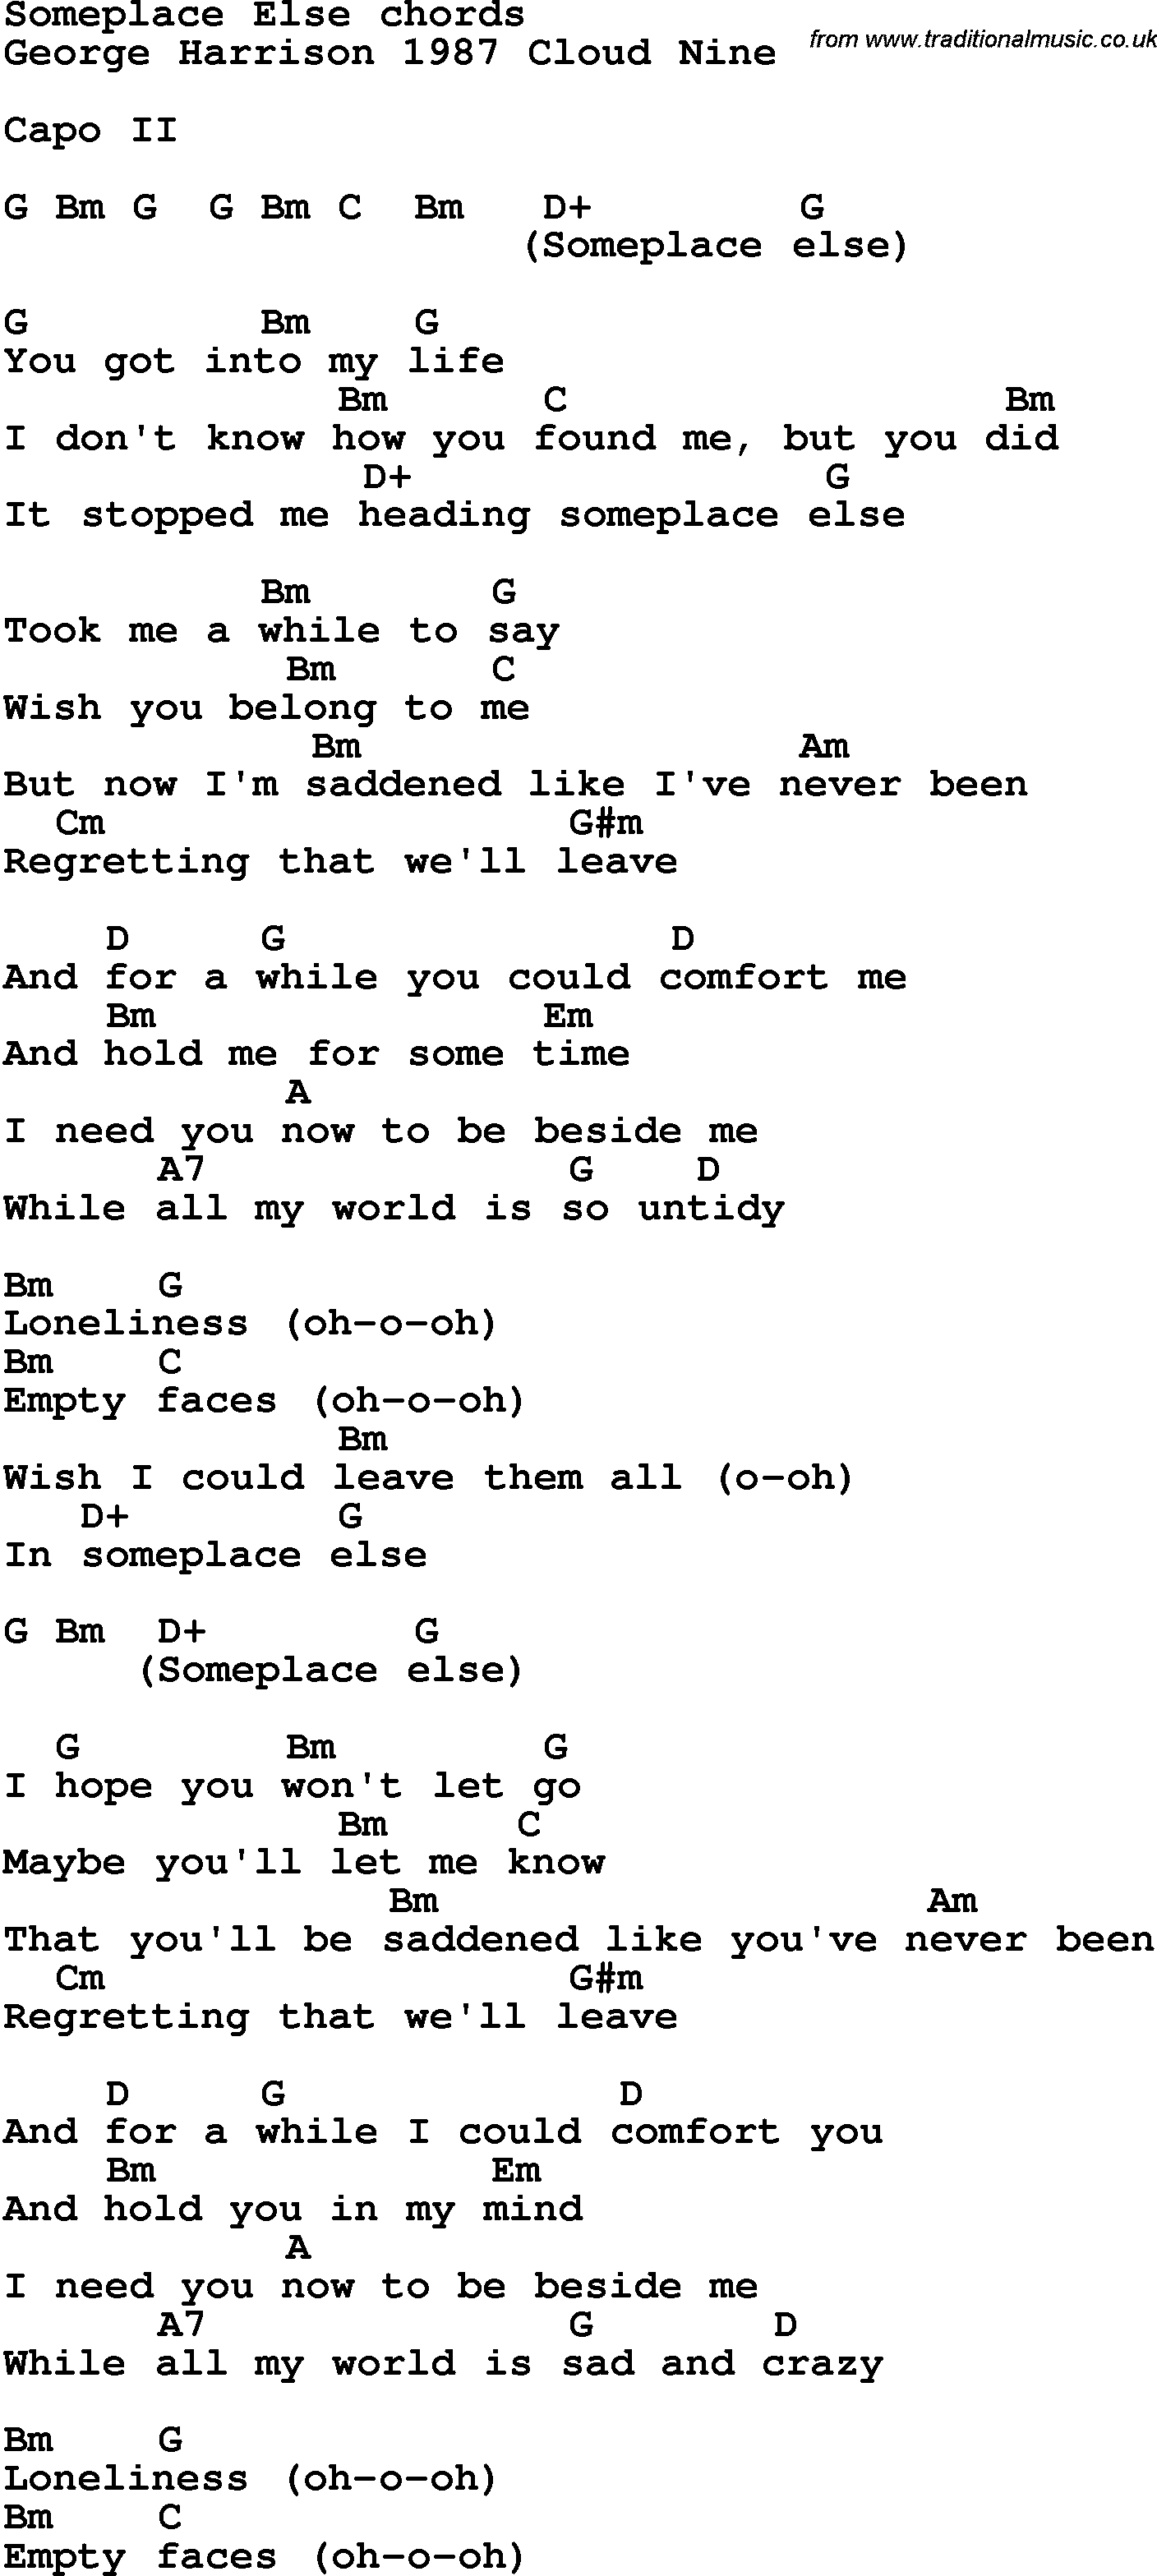 Lion And The Lamb Chords Song Lyrics With Guitar Chords For Someplace Else